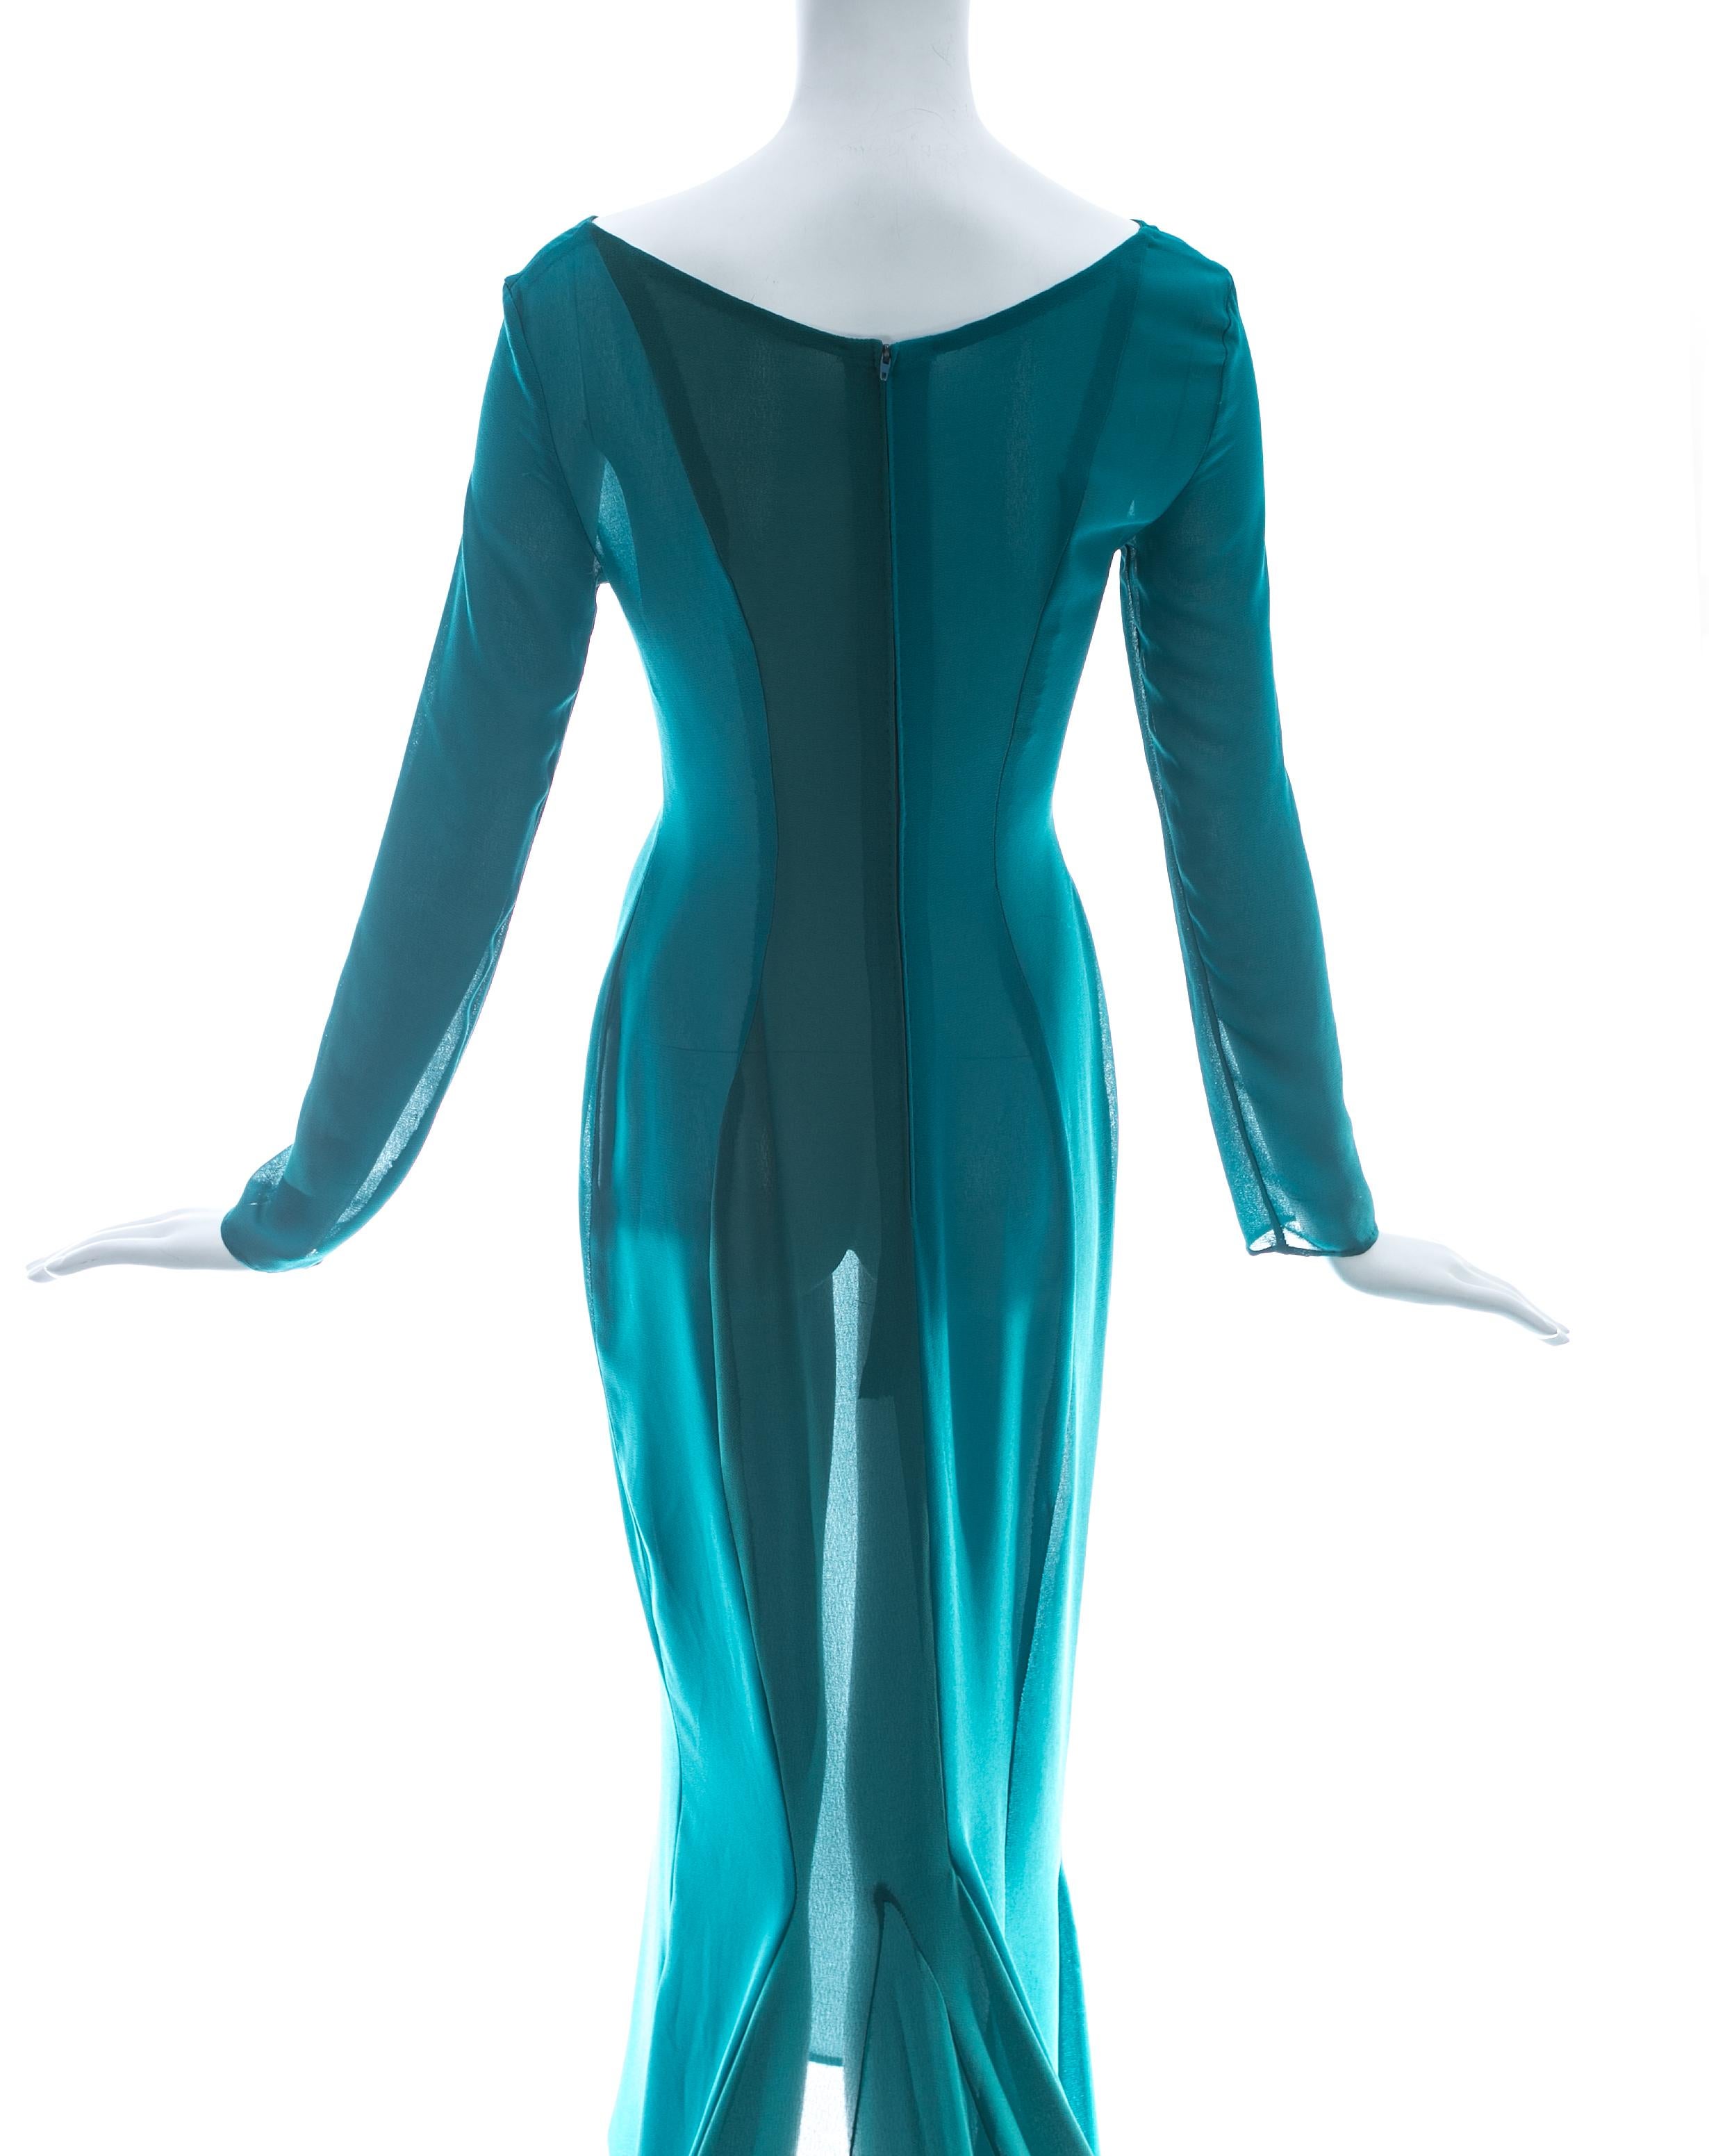 Women's or Men's Olivier Guillemin turquoise crepe evening gown with train, c. 1980s For Sale